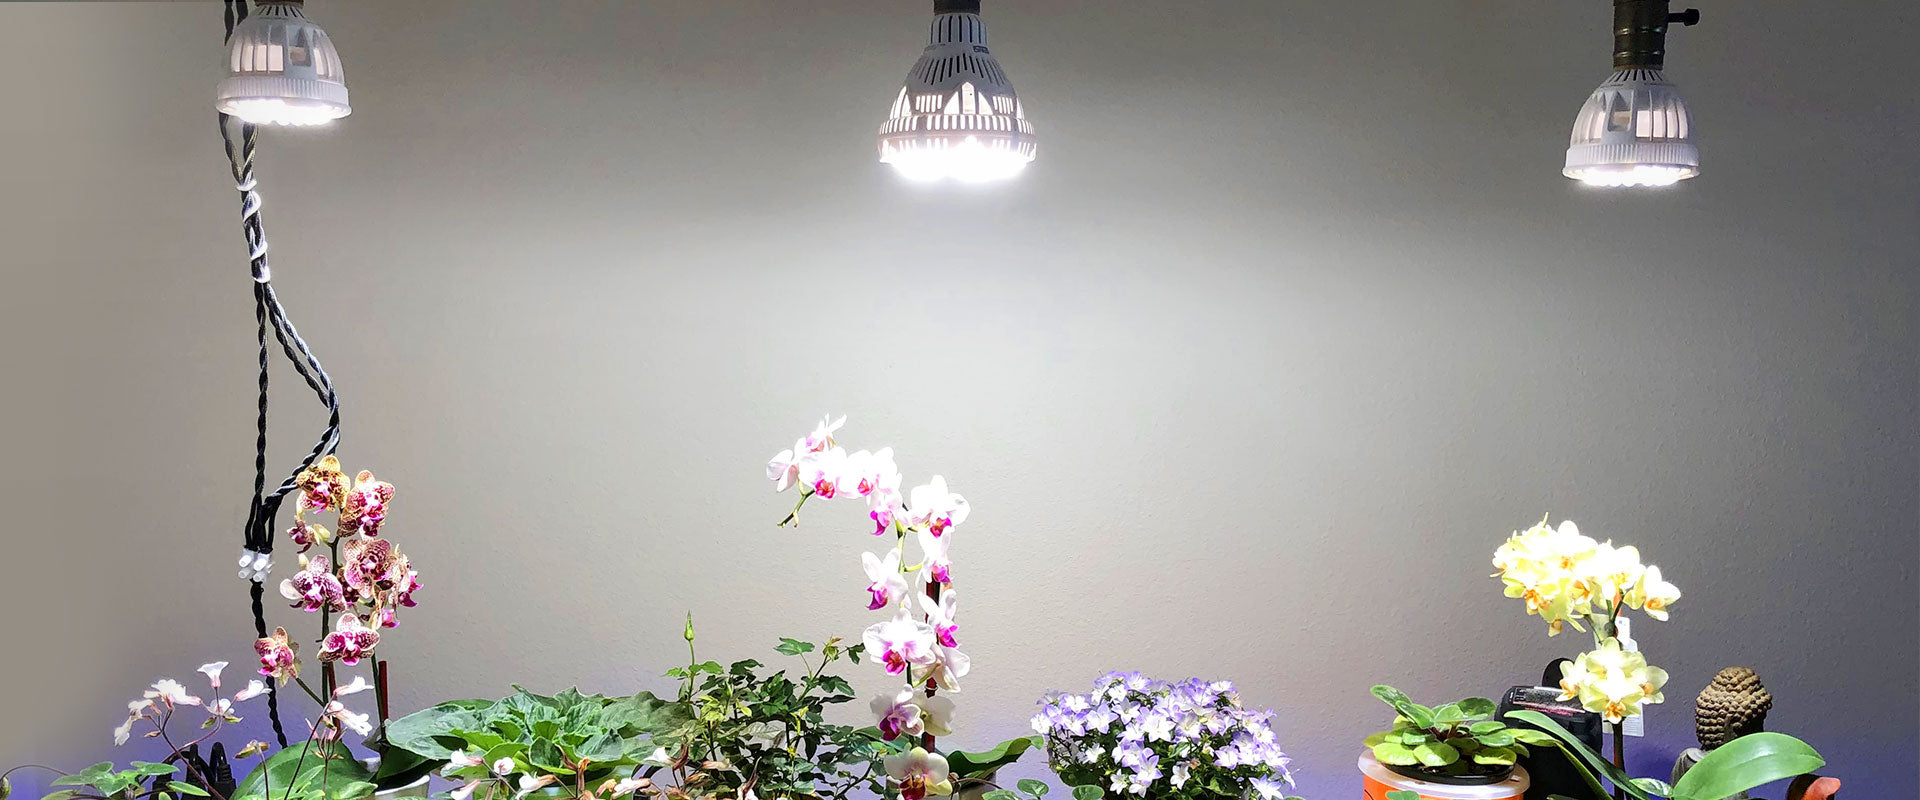 24W led grow light with full spectrum, that can suitable for all the stages of plants